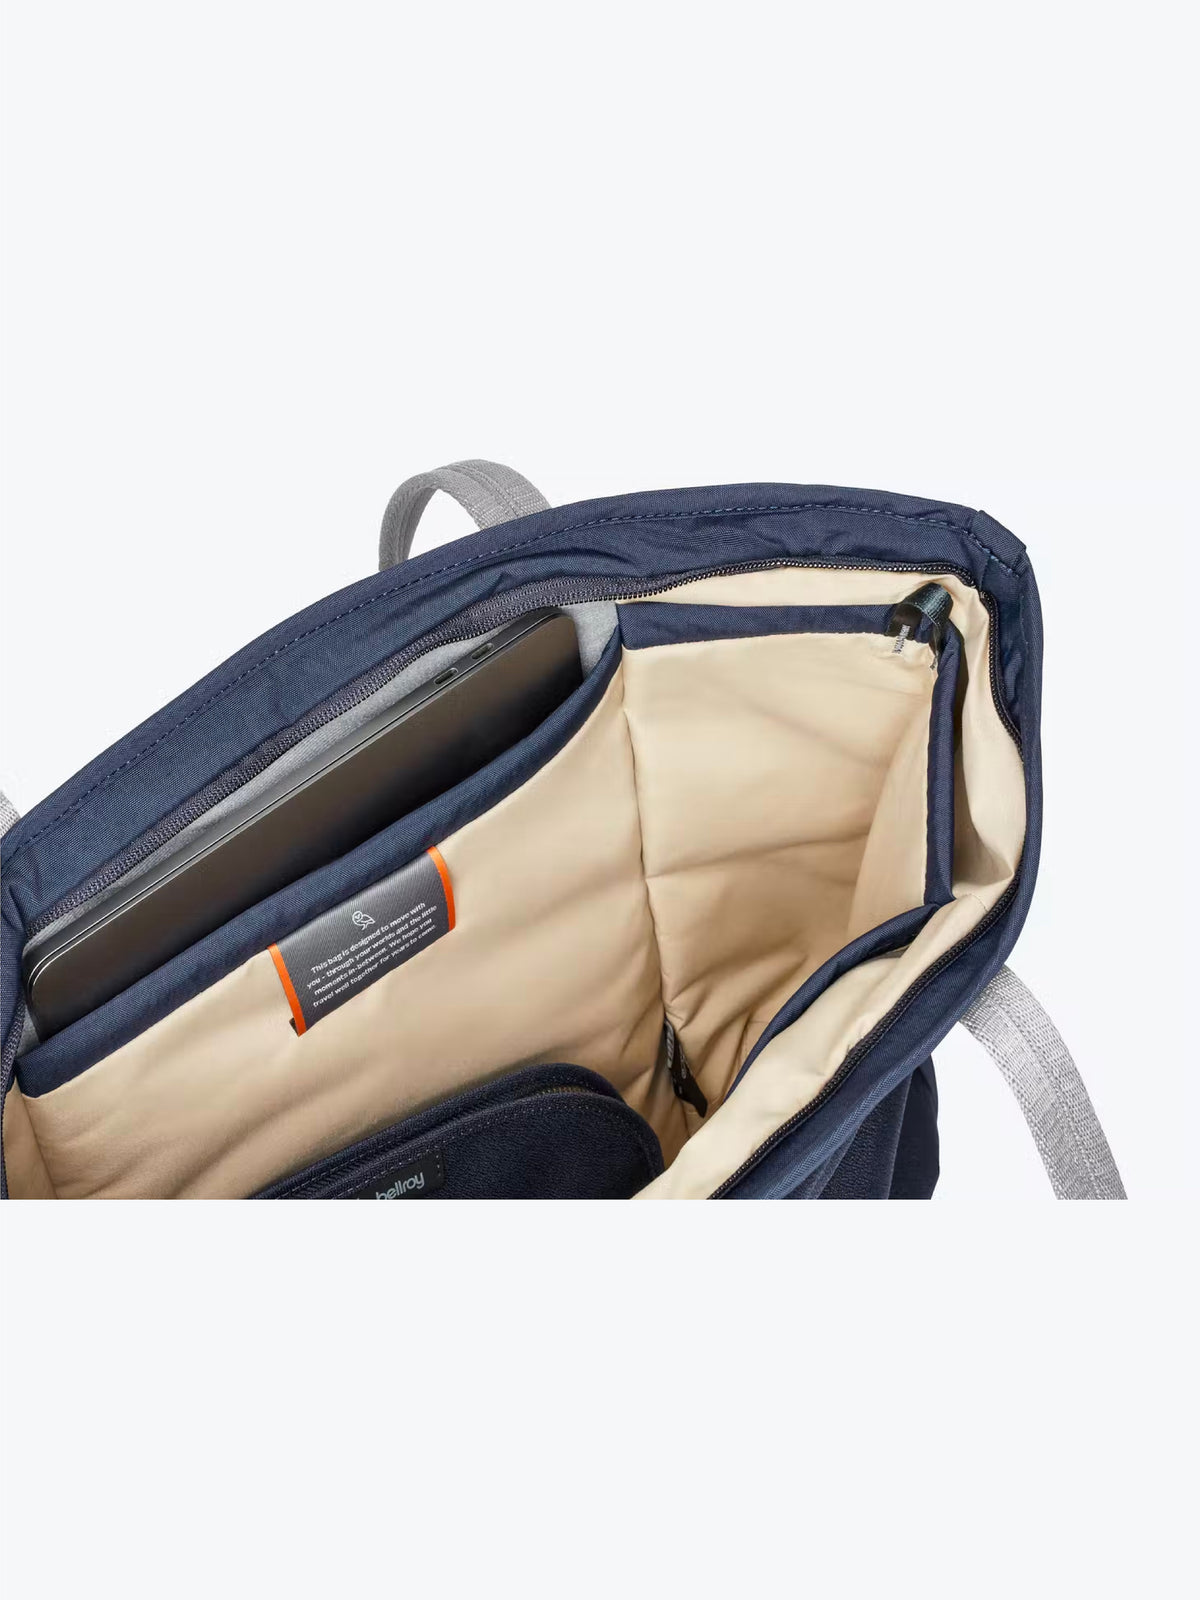 Bellroy Tokyo Tote Compact Navy